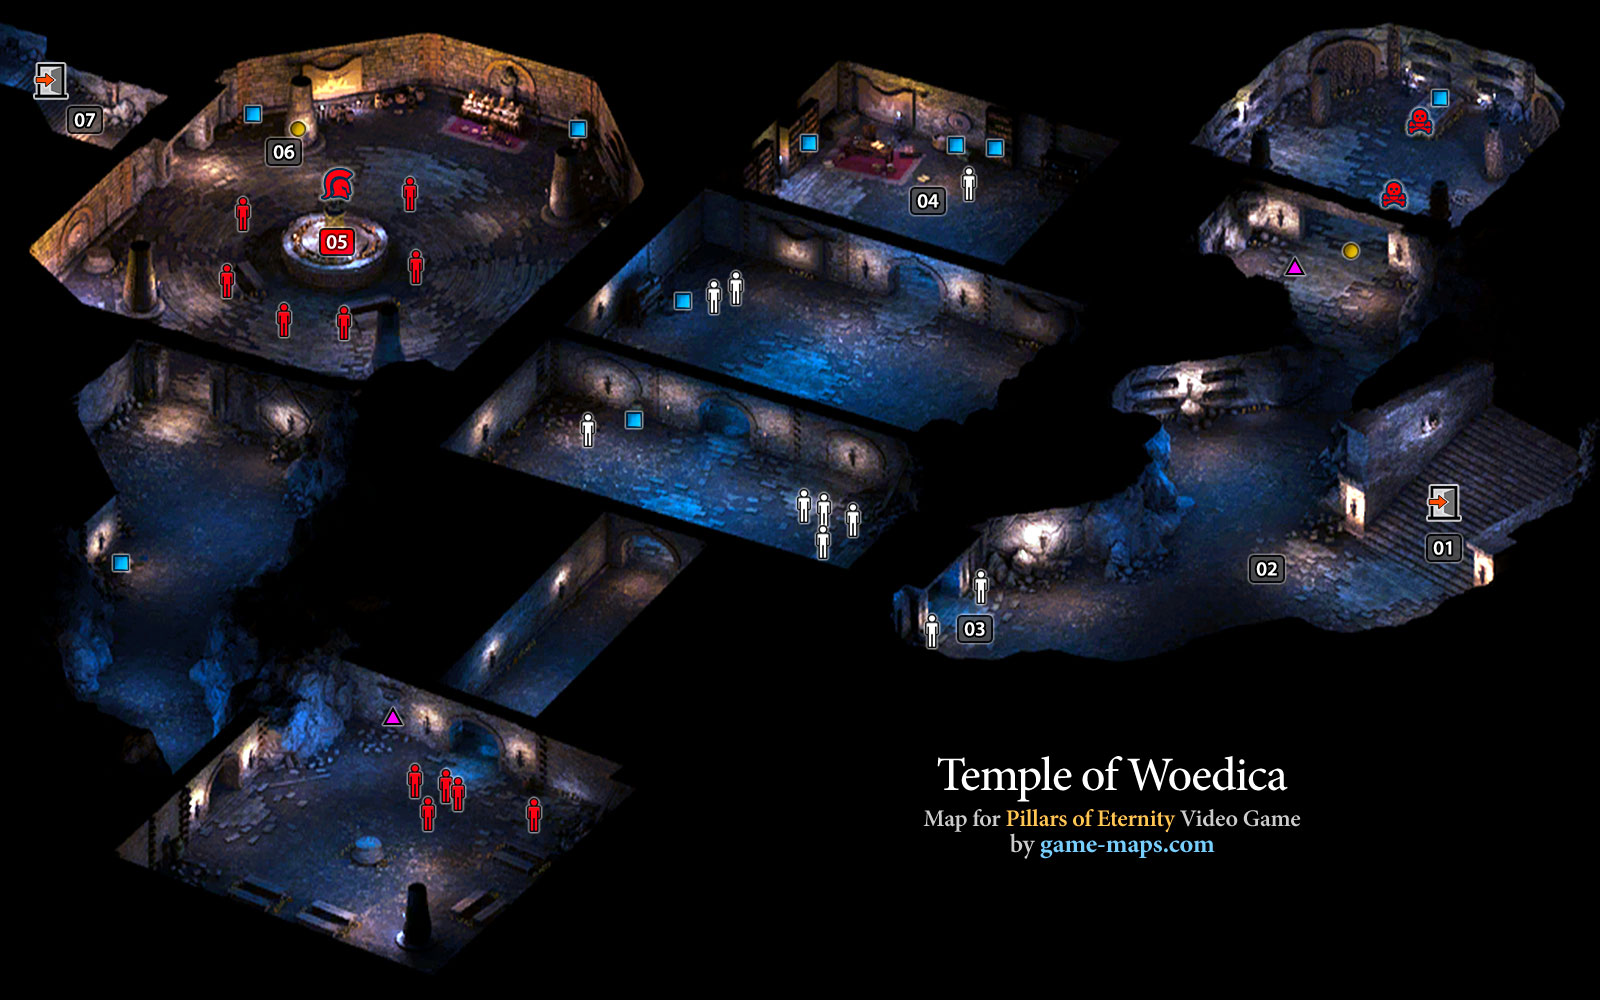 Temple of Woedica Map - Defiance Bay - Pillars of Eternity